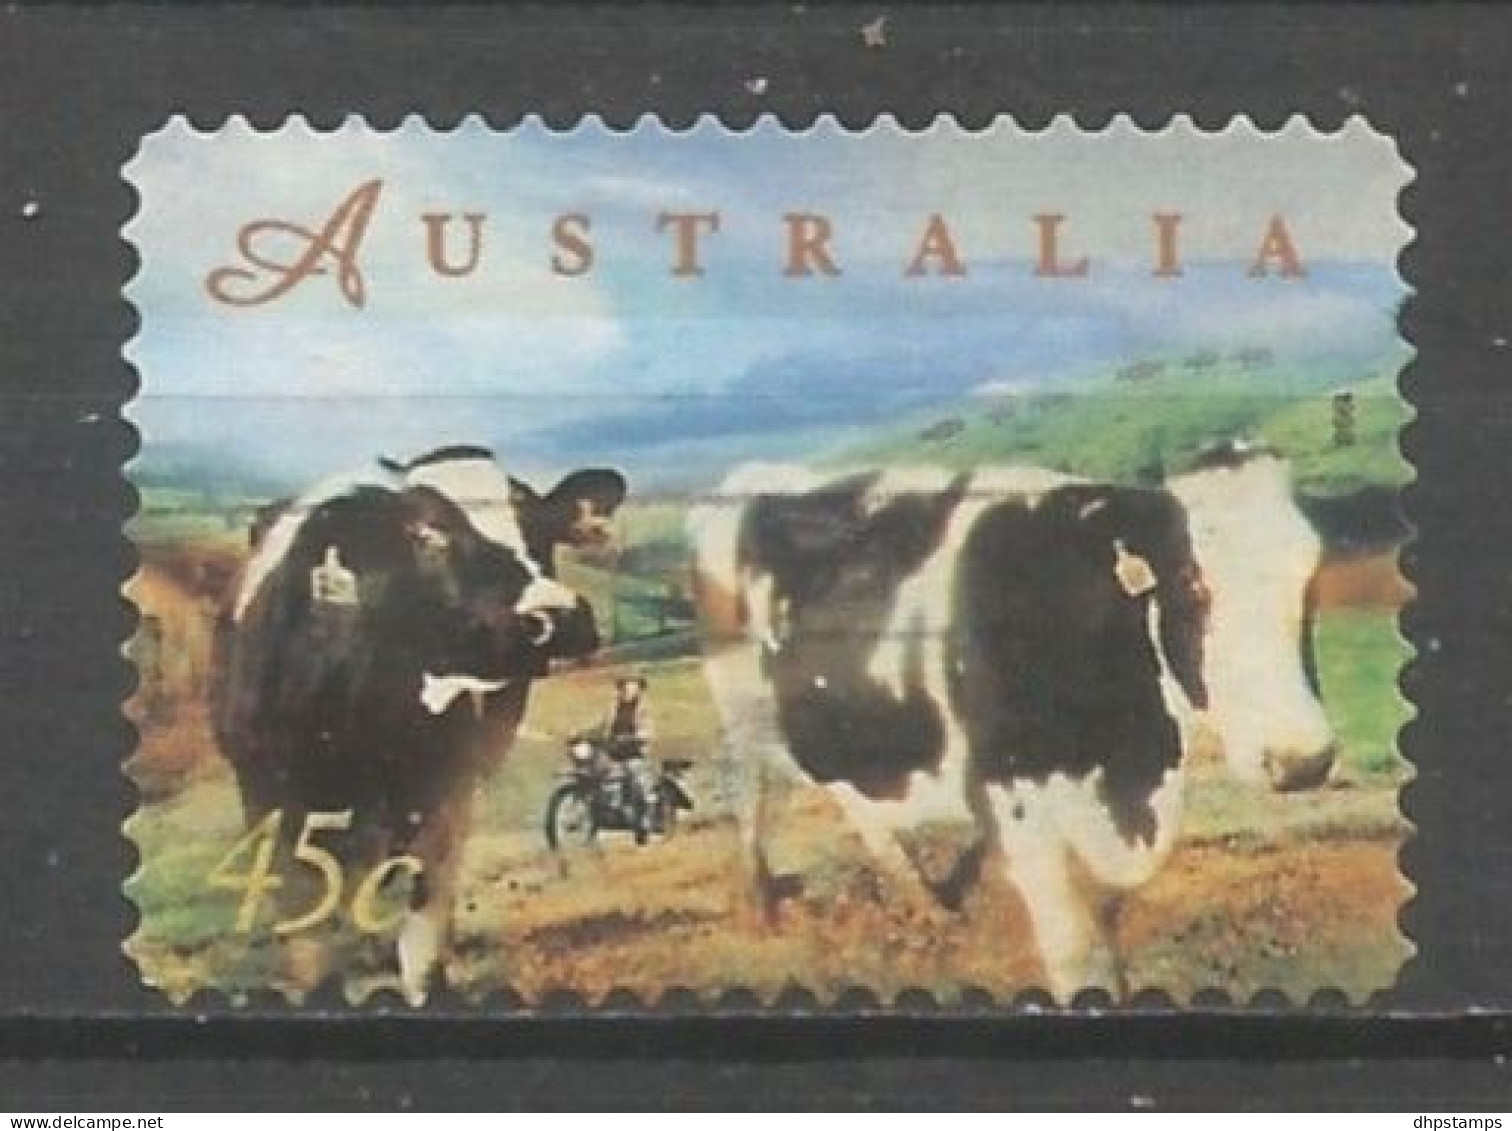 Australia 1998 Farming S.A. Y.T. 1669 (0) - Used Stamps